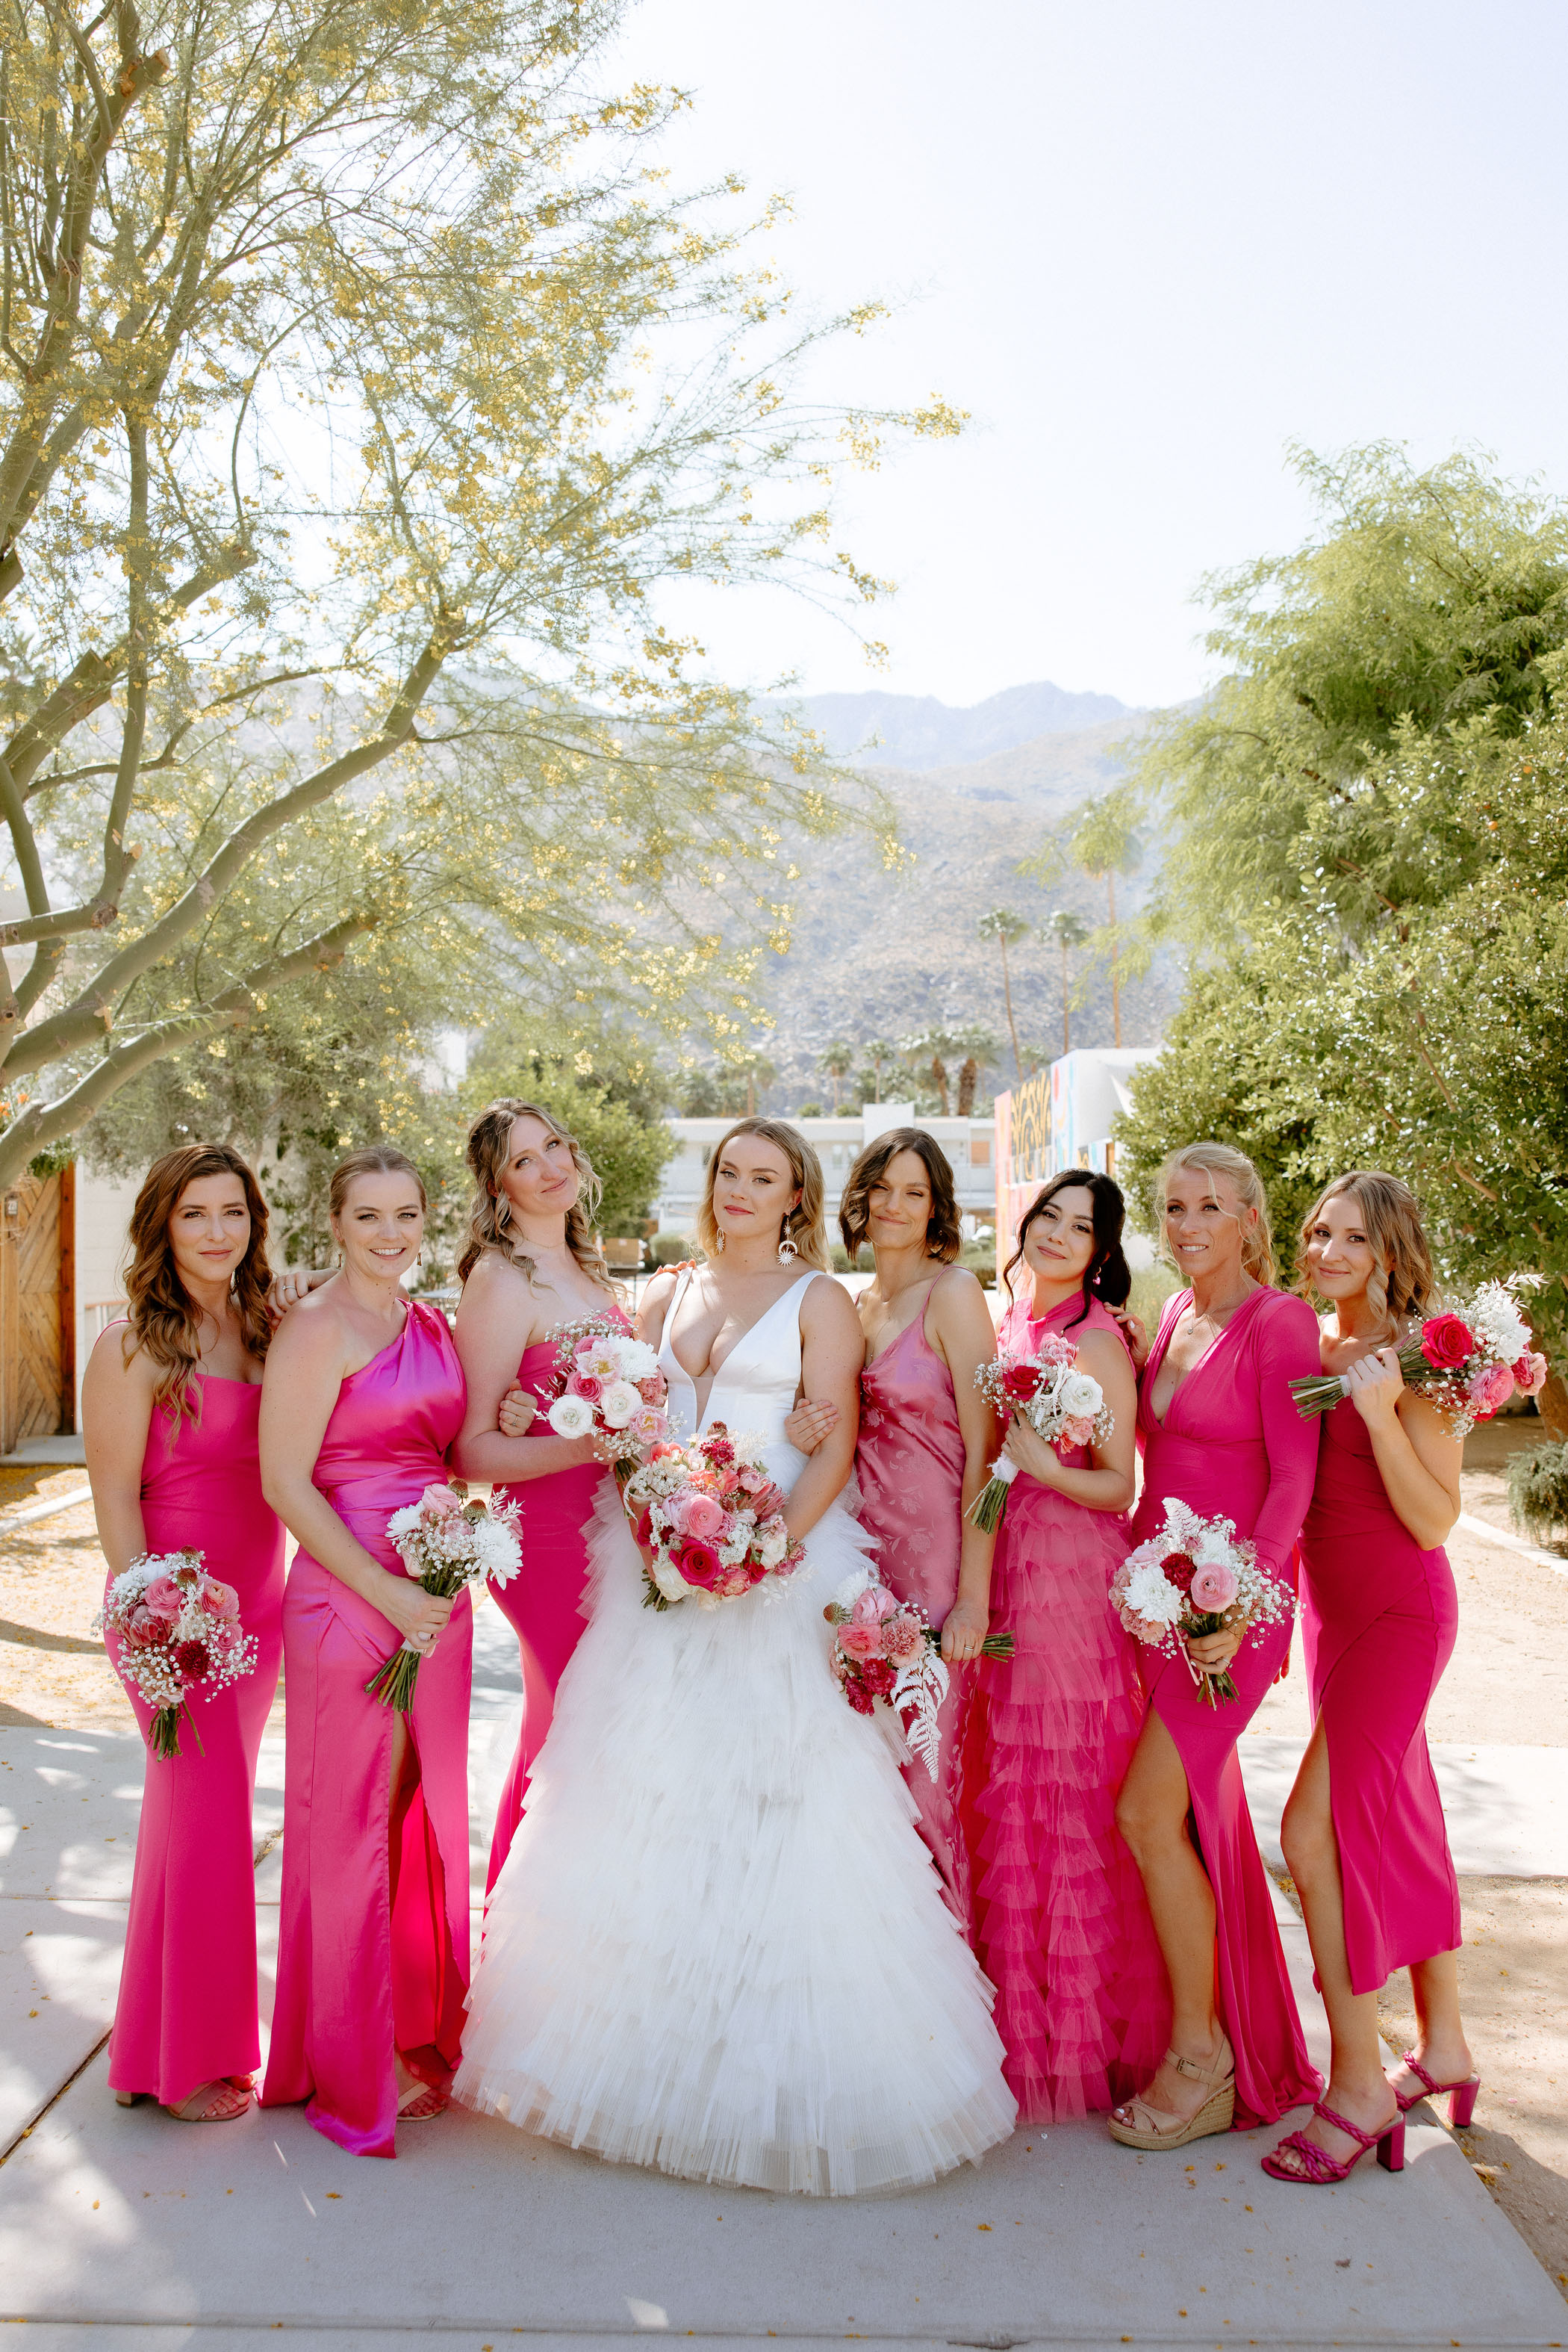 Barbie Hot Pink Wedding at the Ace Hotel Palm Springs Pink Bridesmaids